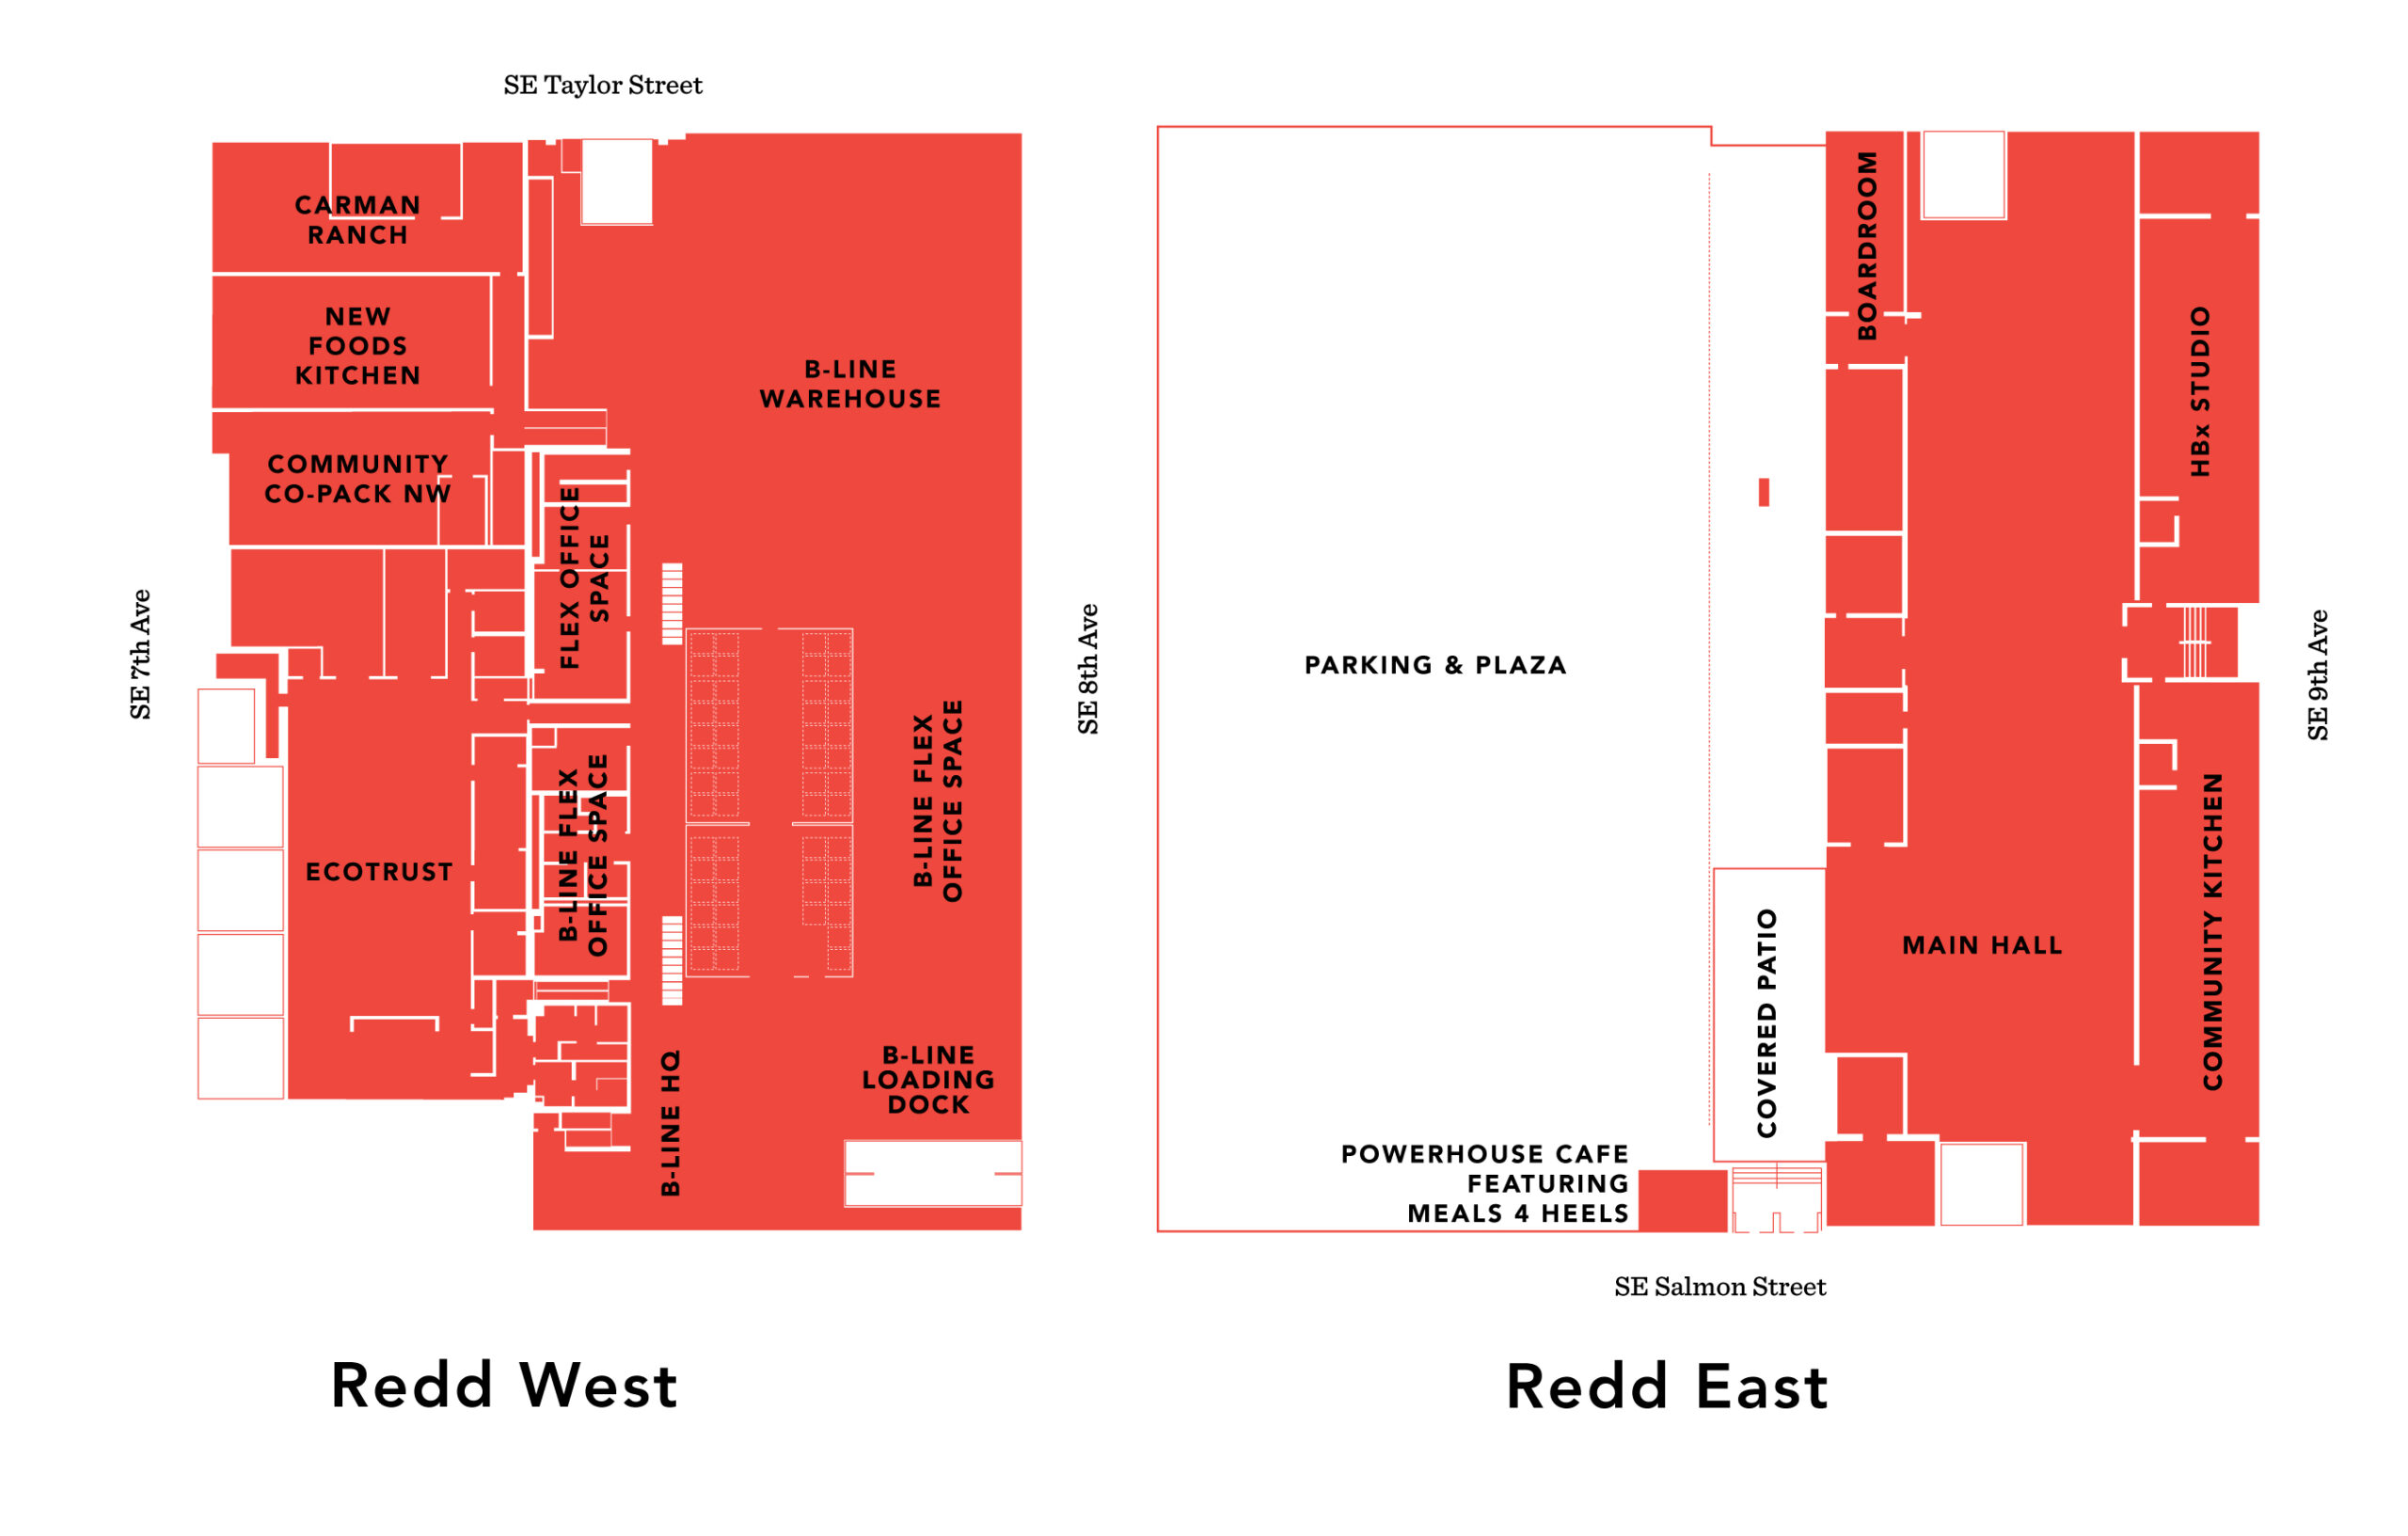 A graphical map in red showing the Redd on Salmon Street campus